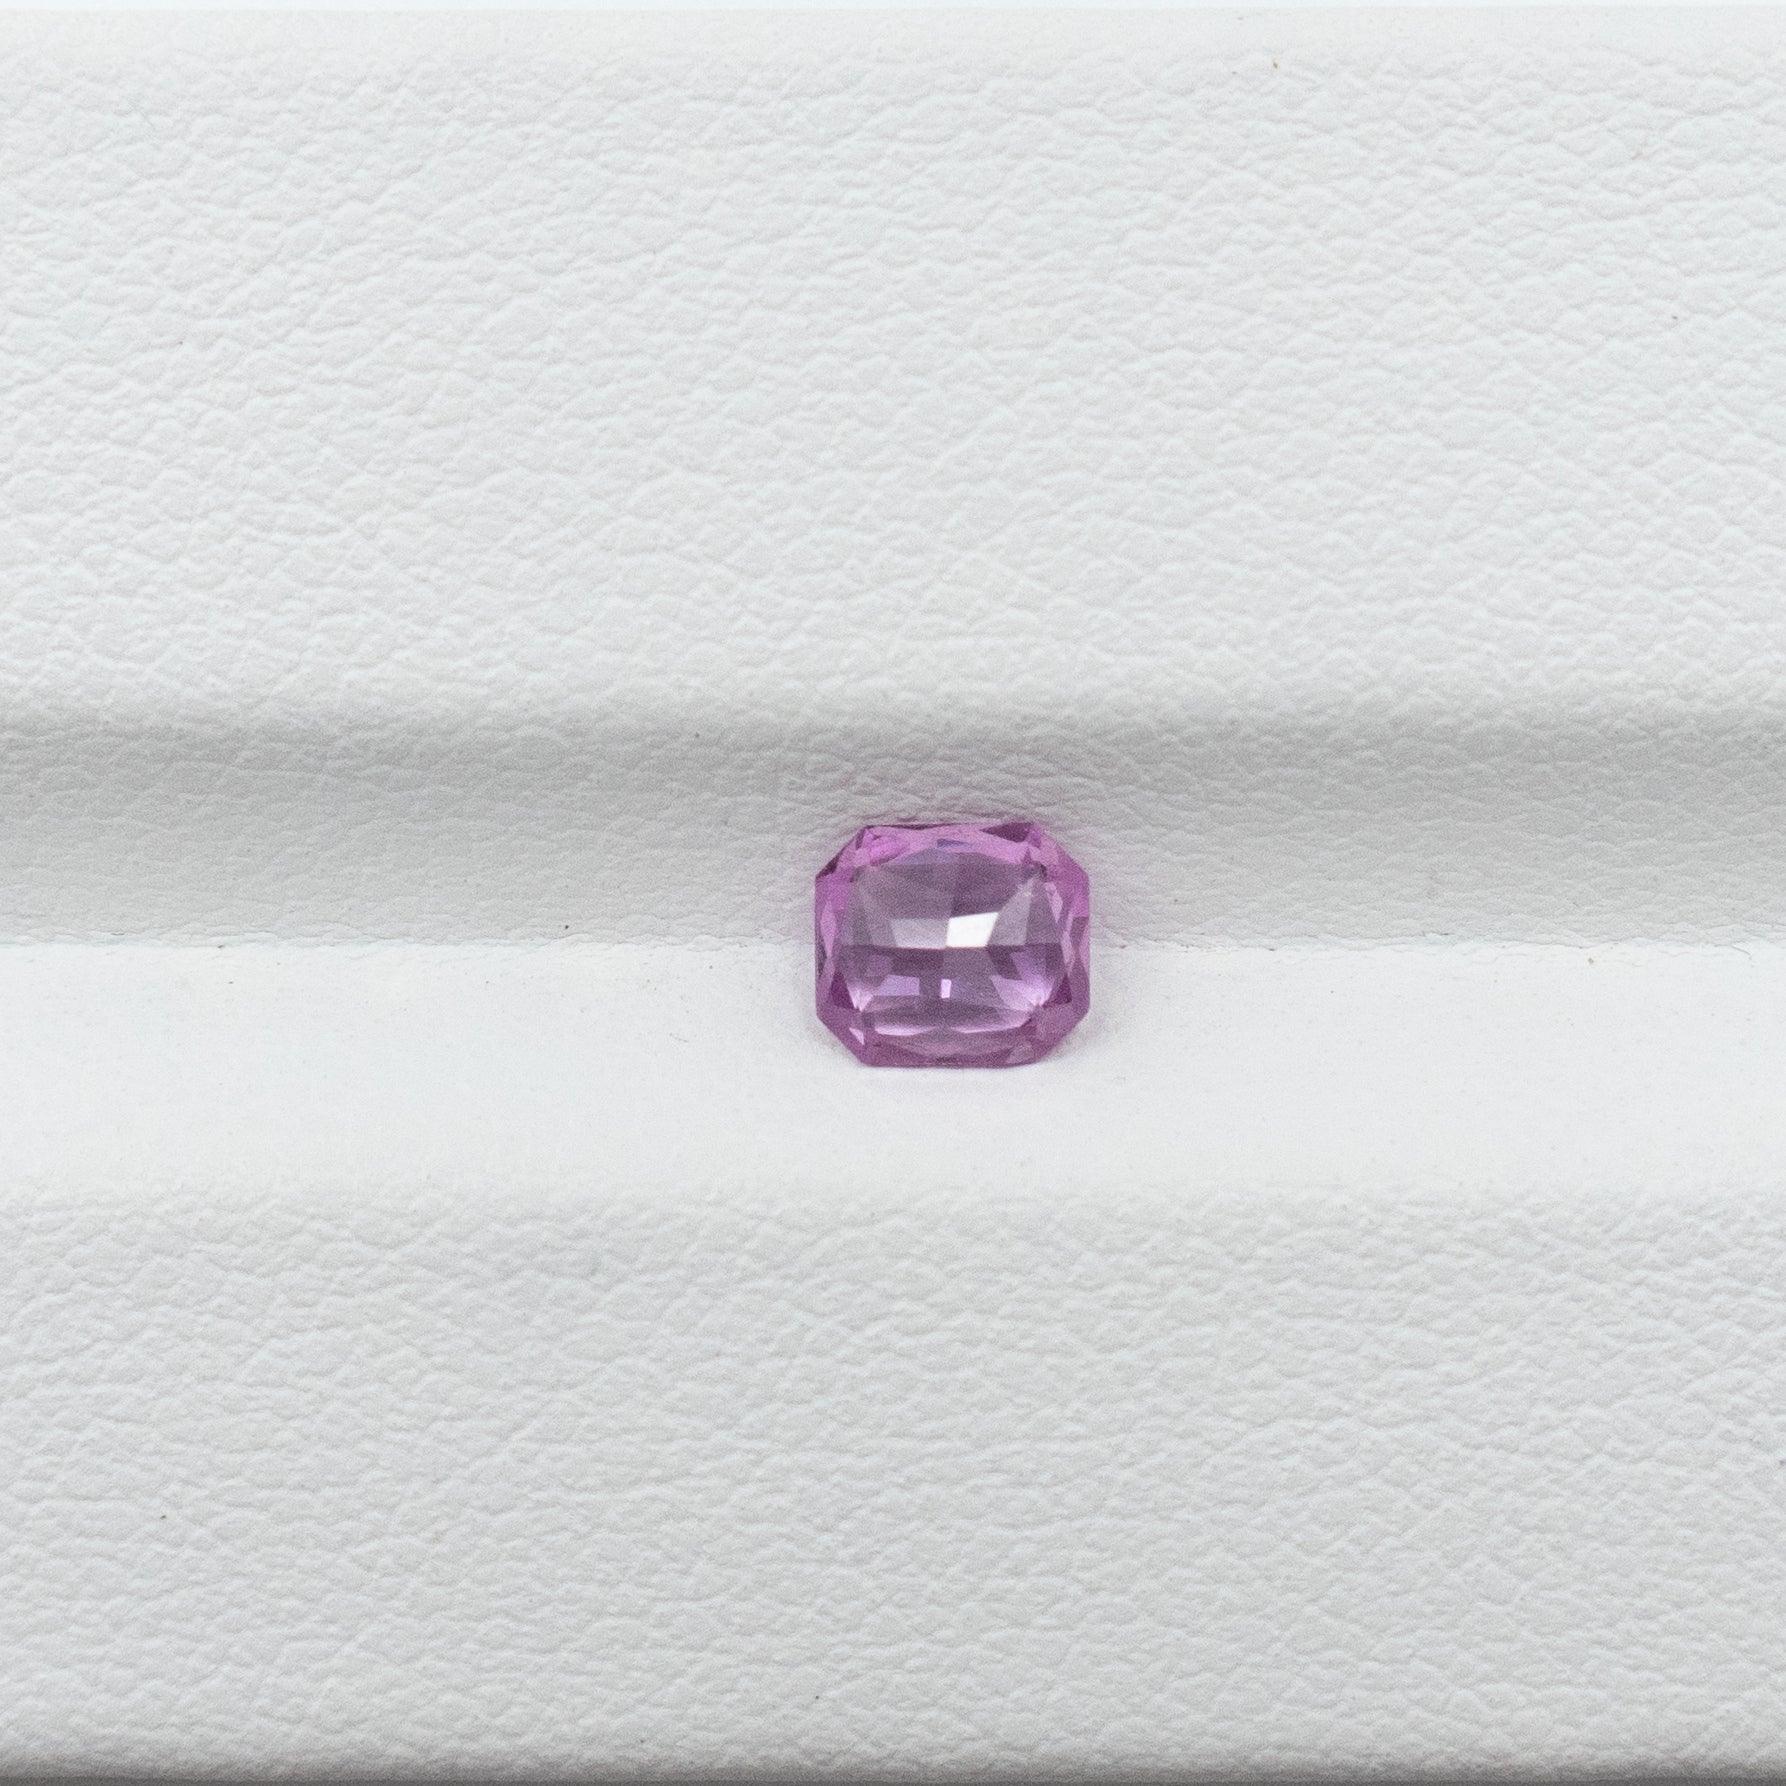 Violet-ish Pink Sapphire Natural Heated 0.63ct - The Colored Stone Co.